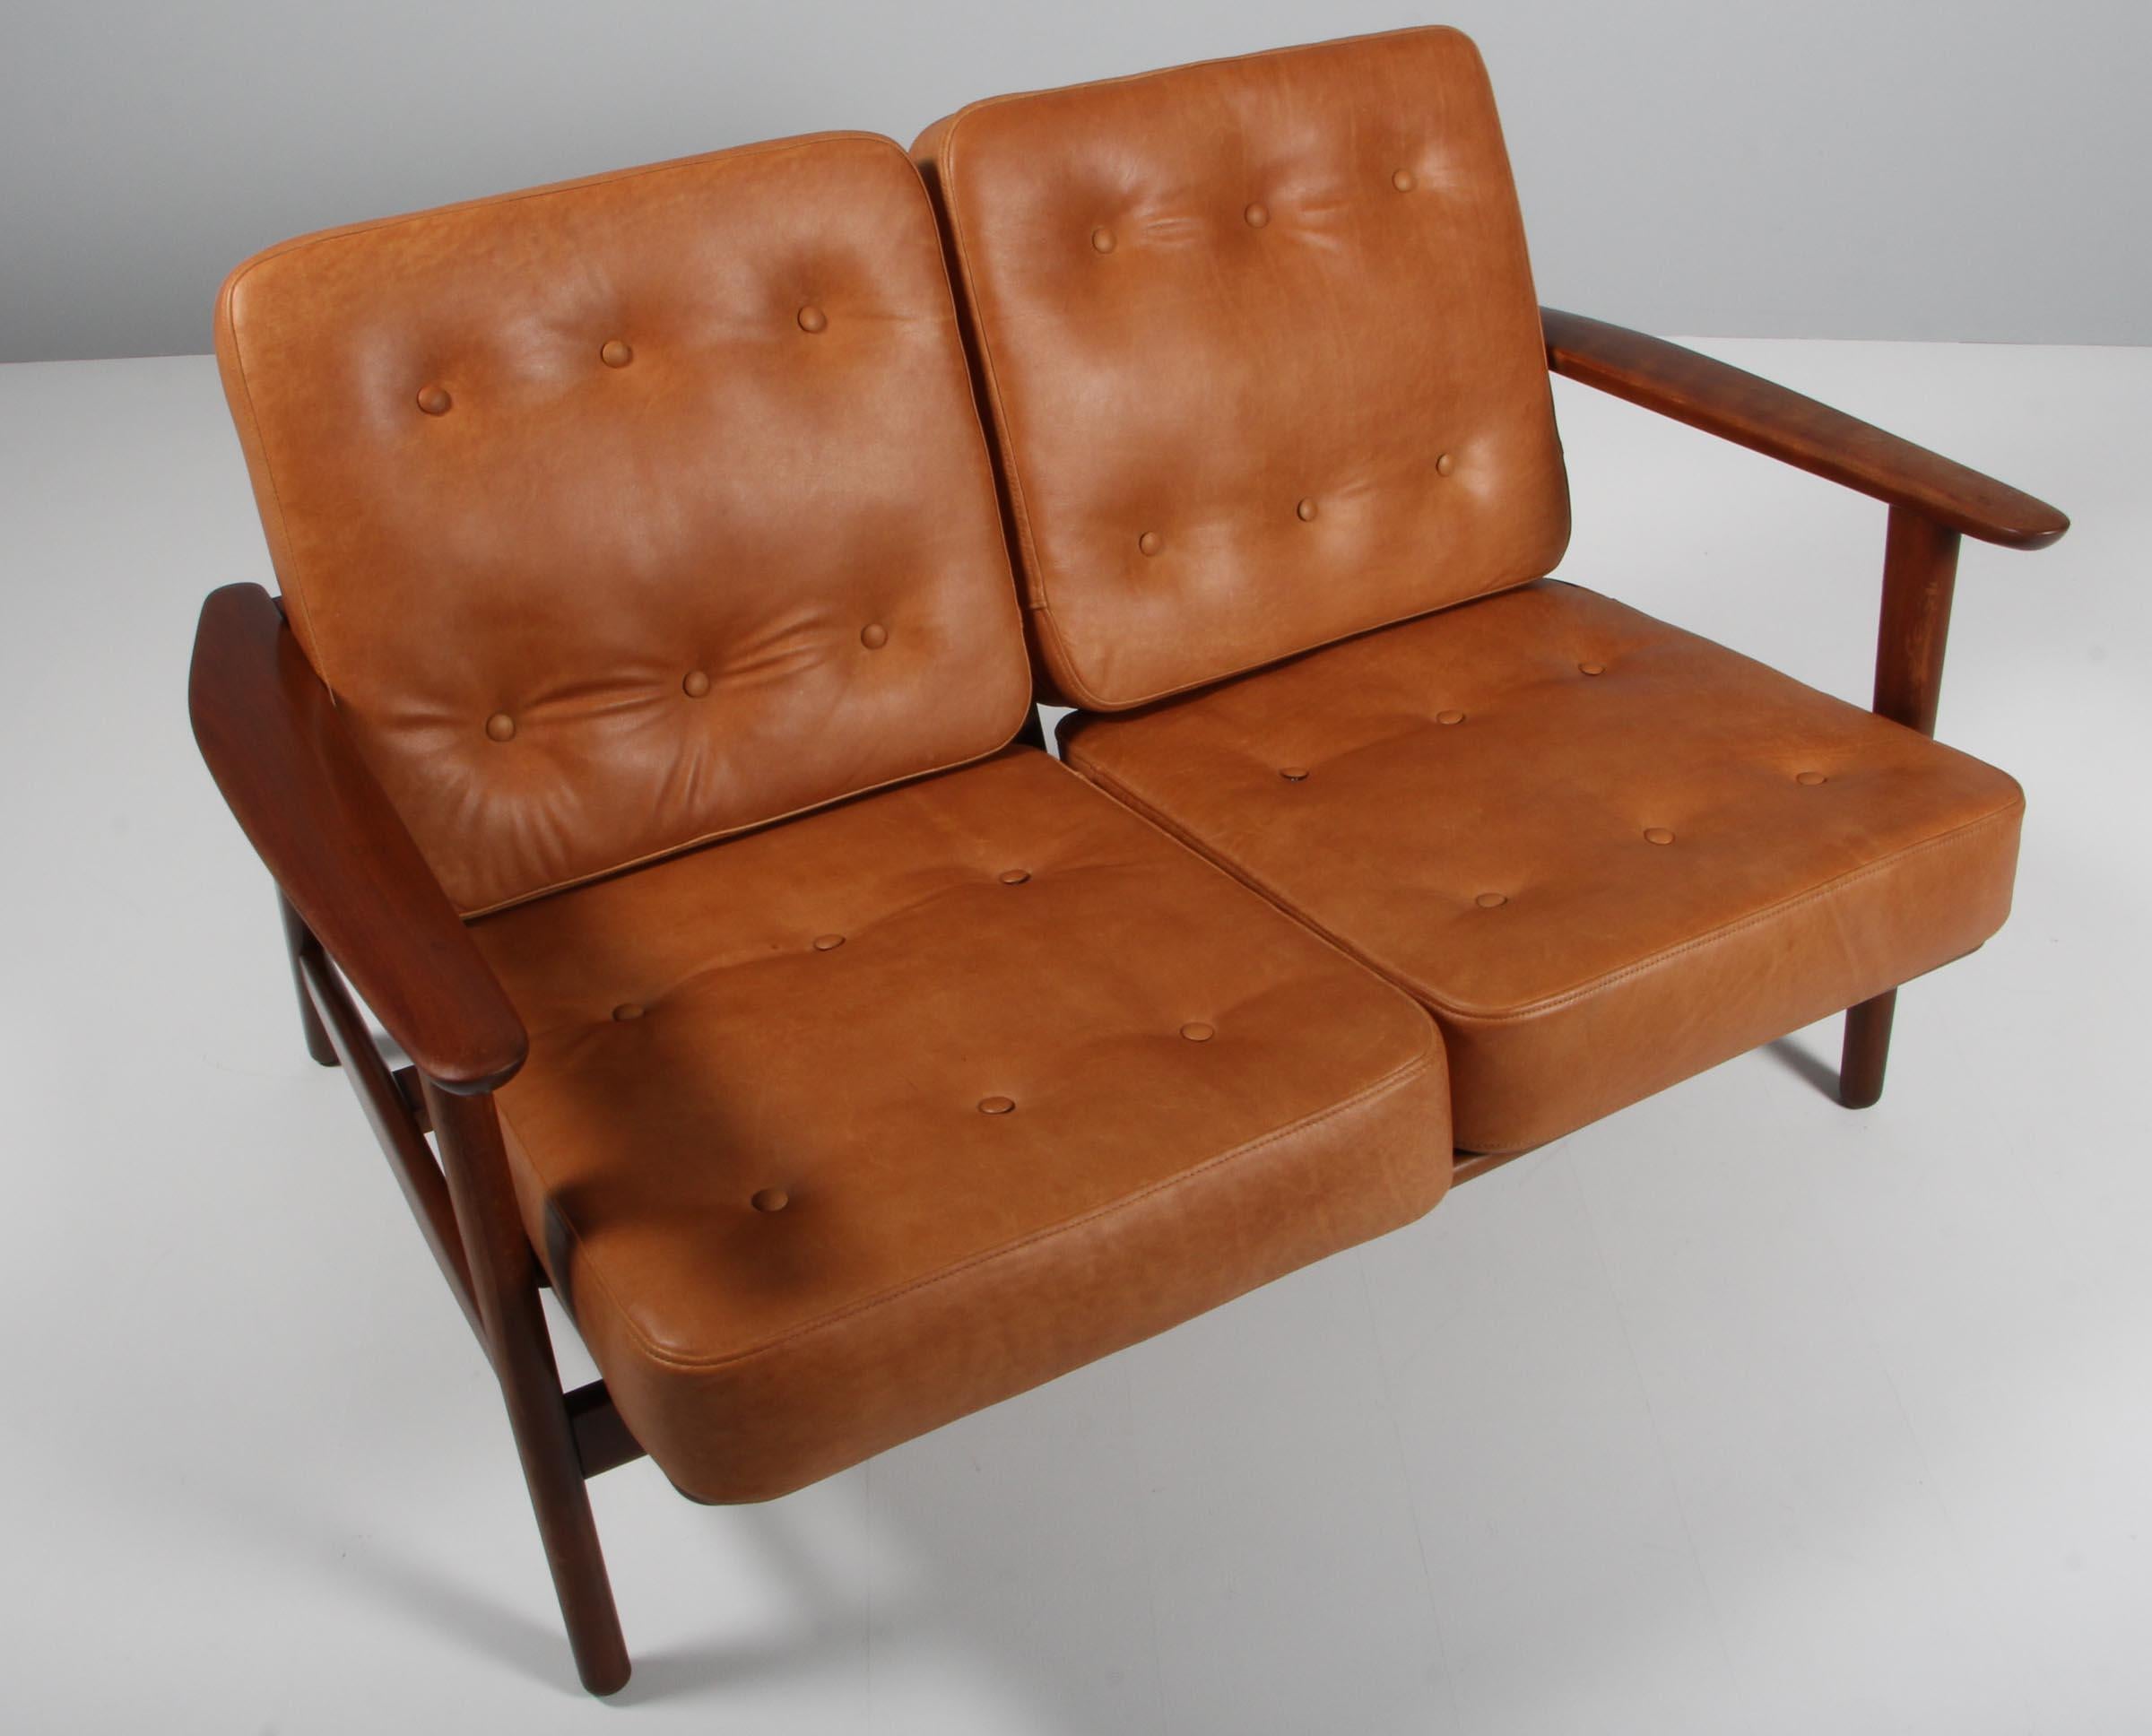 Hans J. Wegner two seat sofa with loose cushions new upholstered with cognac aniline leather with buttons.

Stained beech.

Model 233, made by GETAMA.